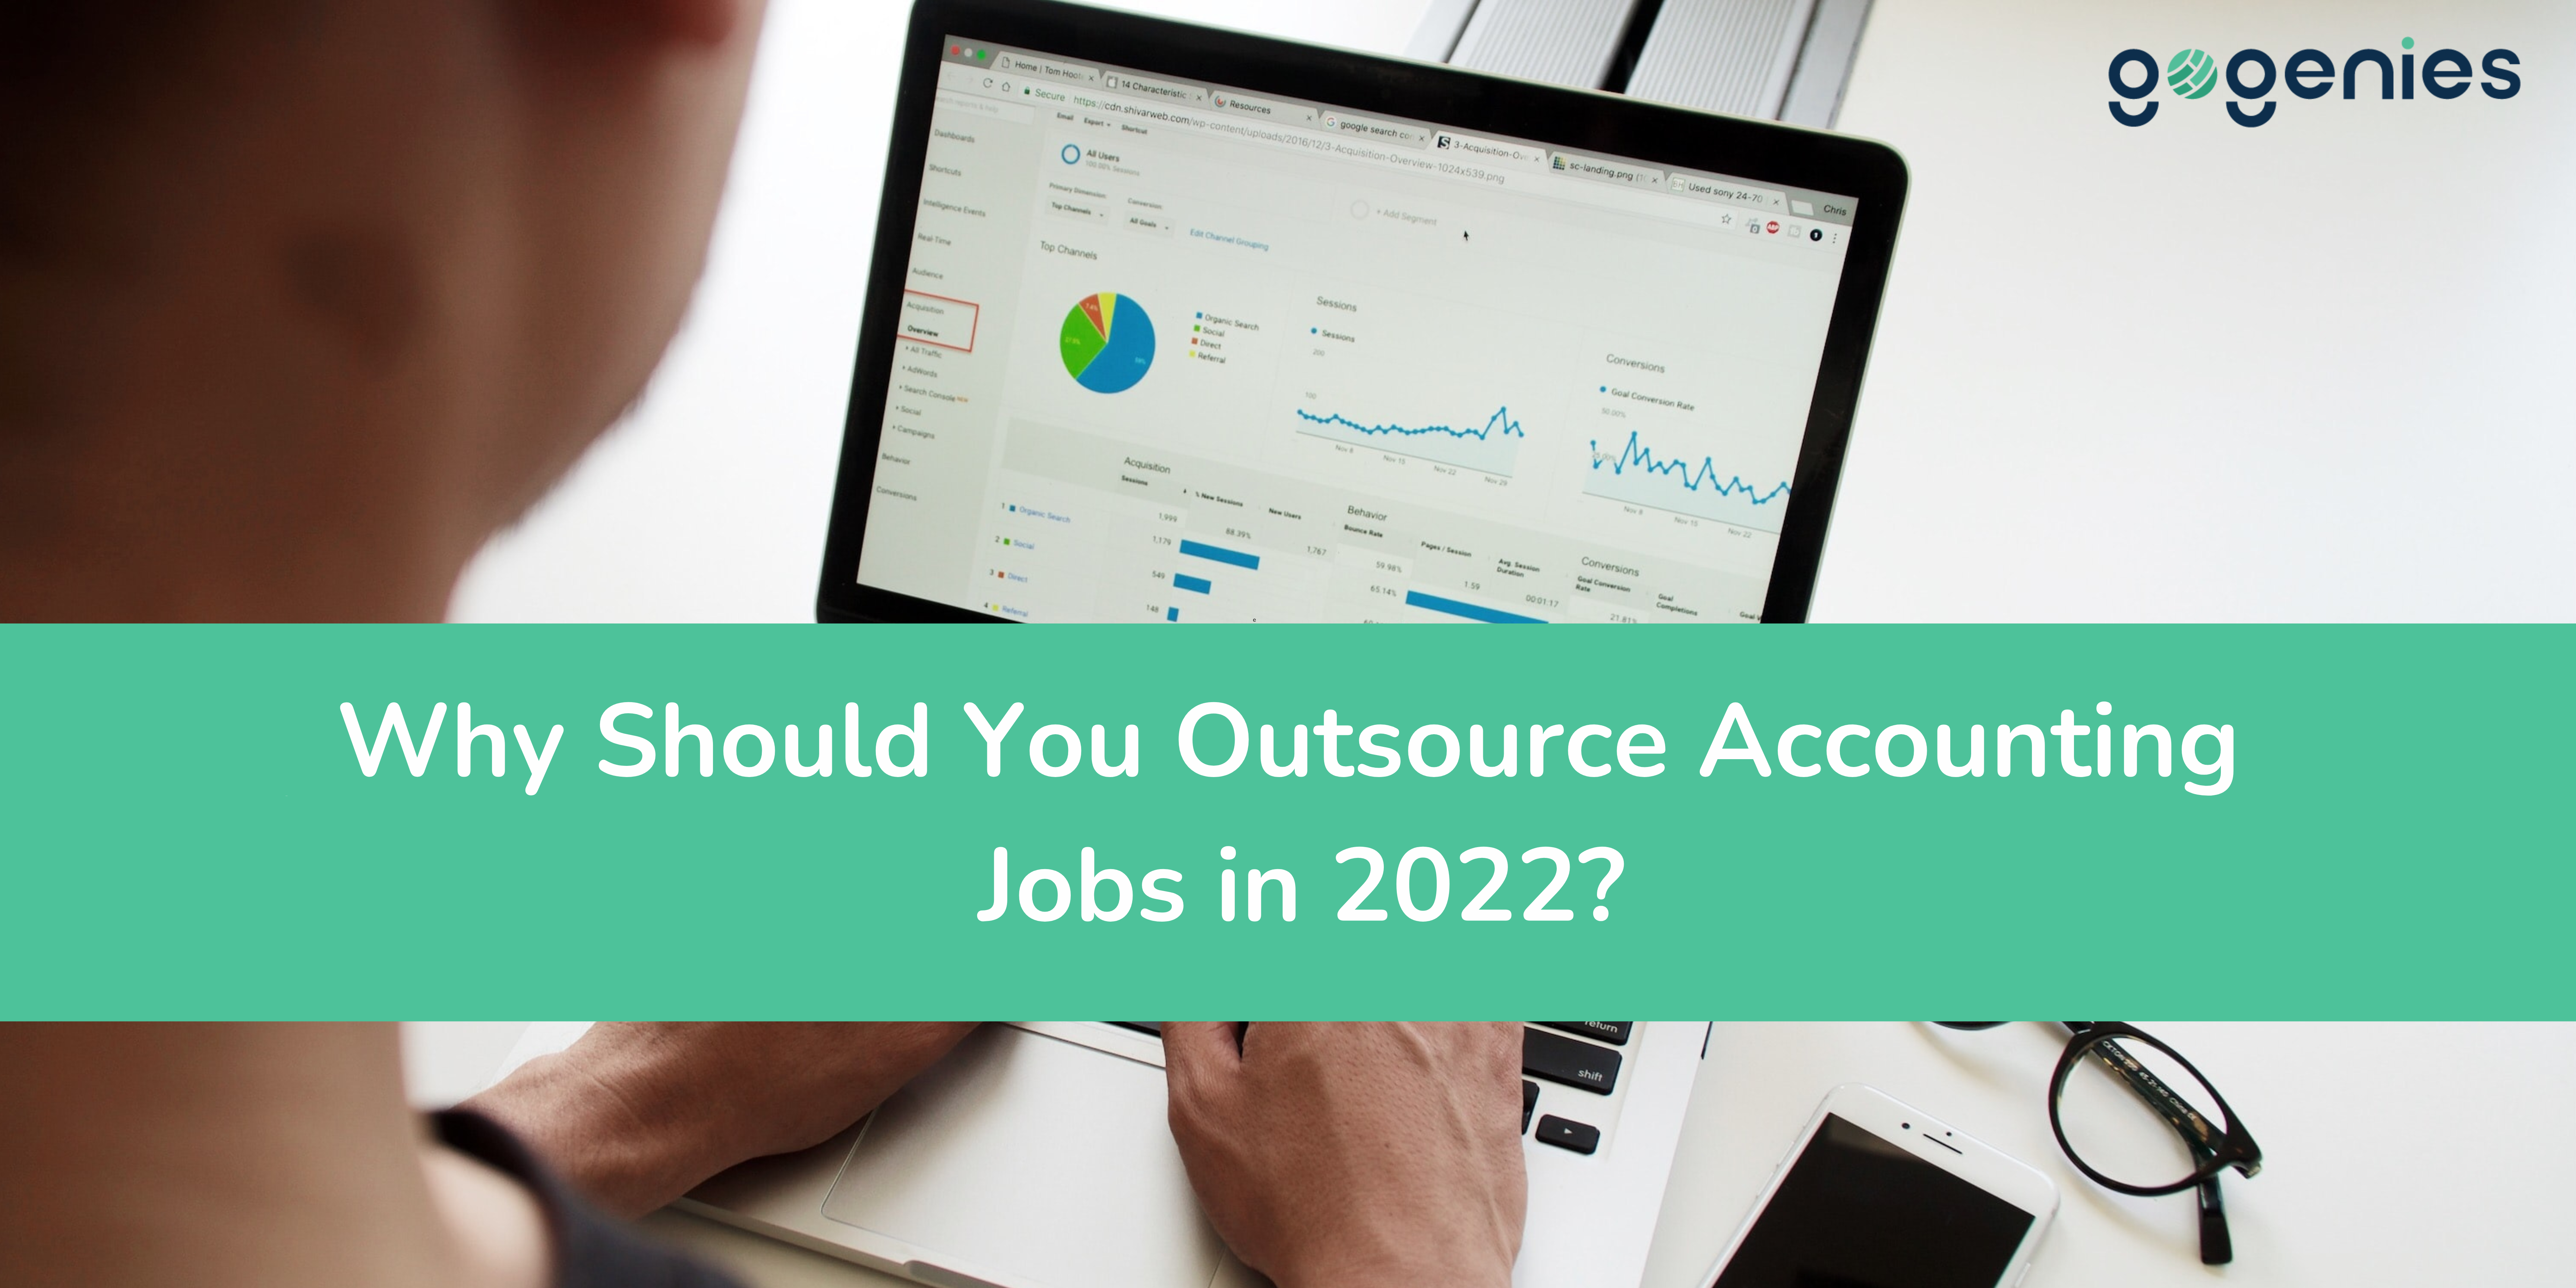 Why Should You Outsource Accounting Jobs in 2022?